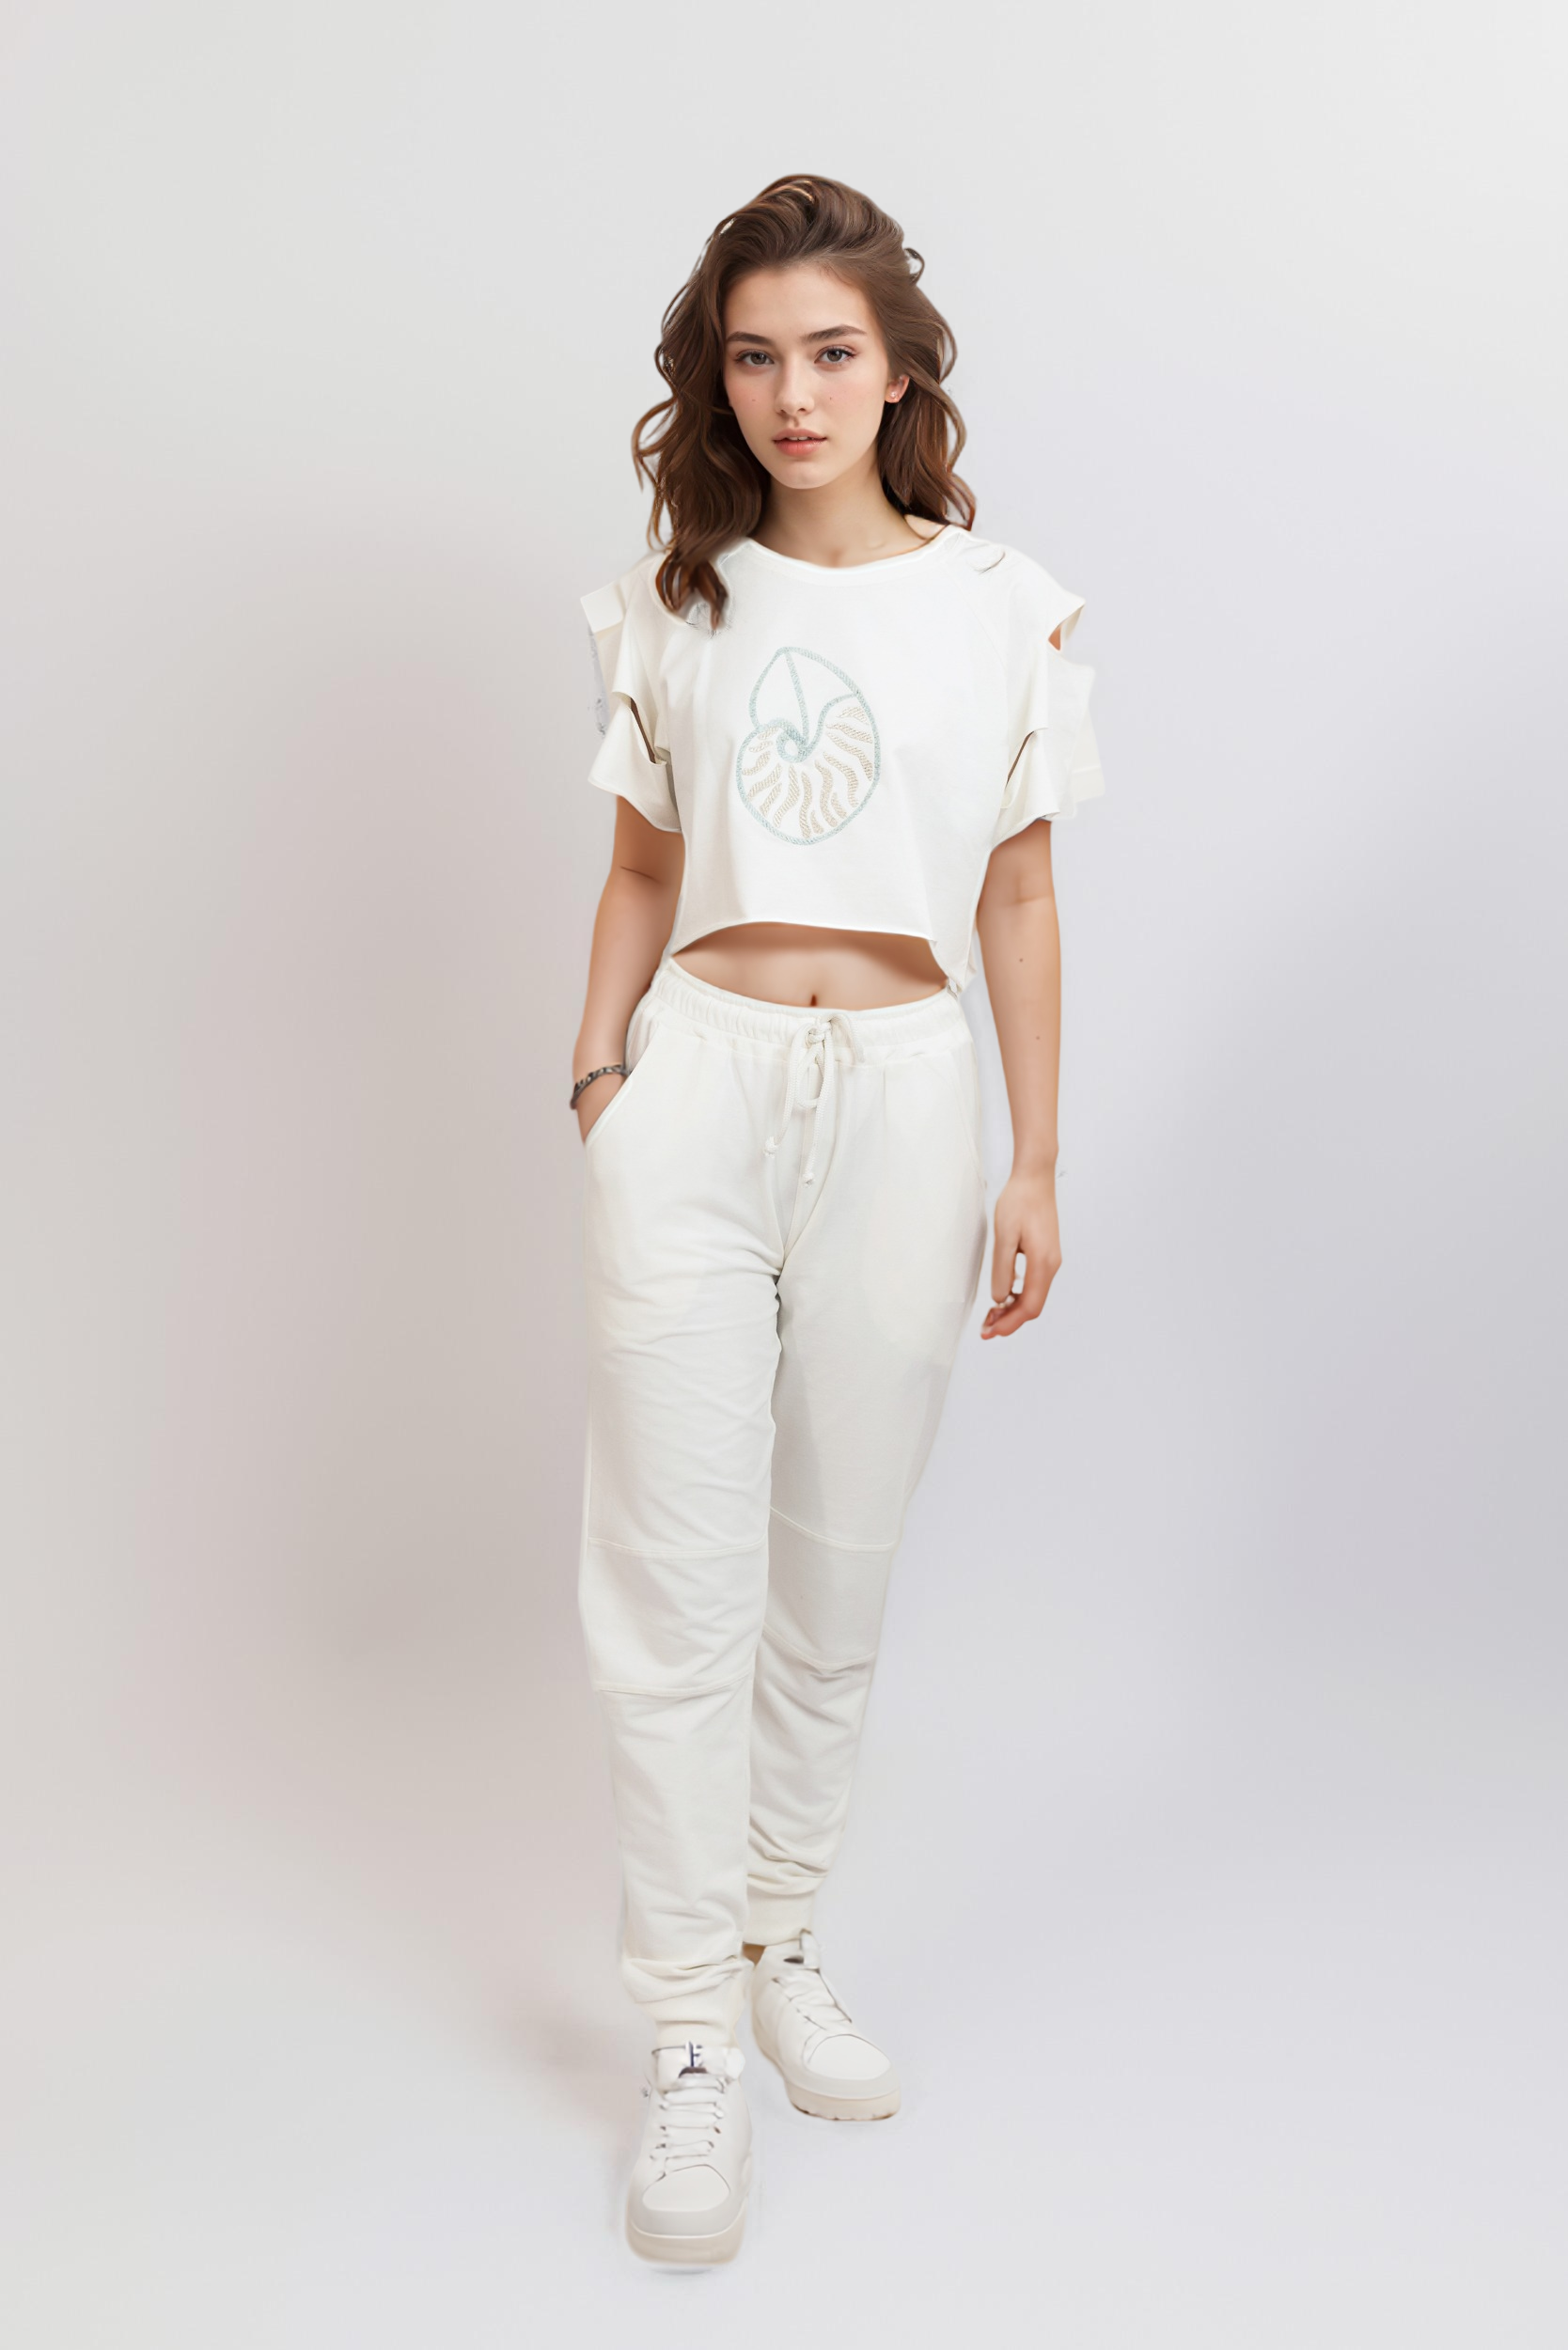 Seashell Crop Top Cutout Sleeves For Women - Off White